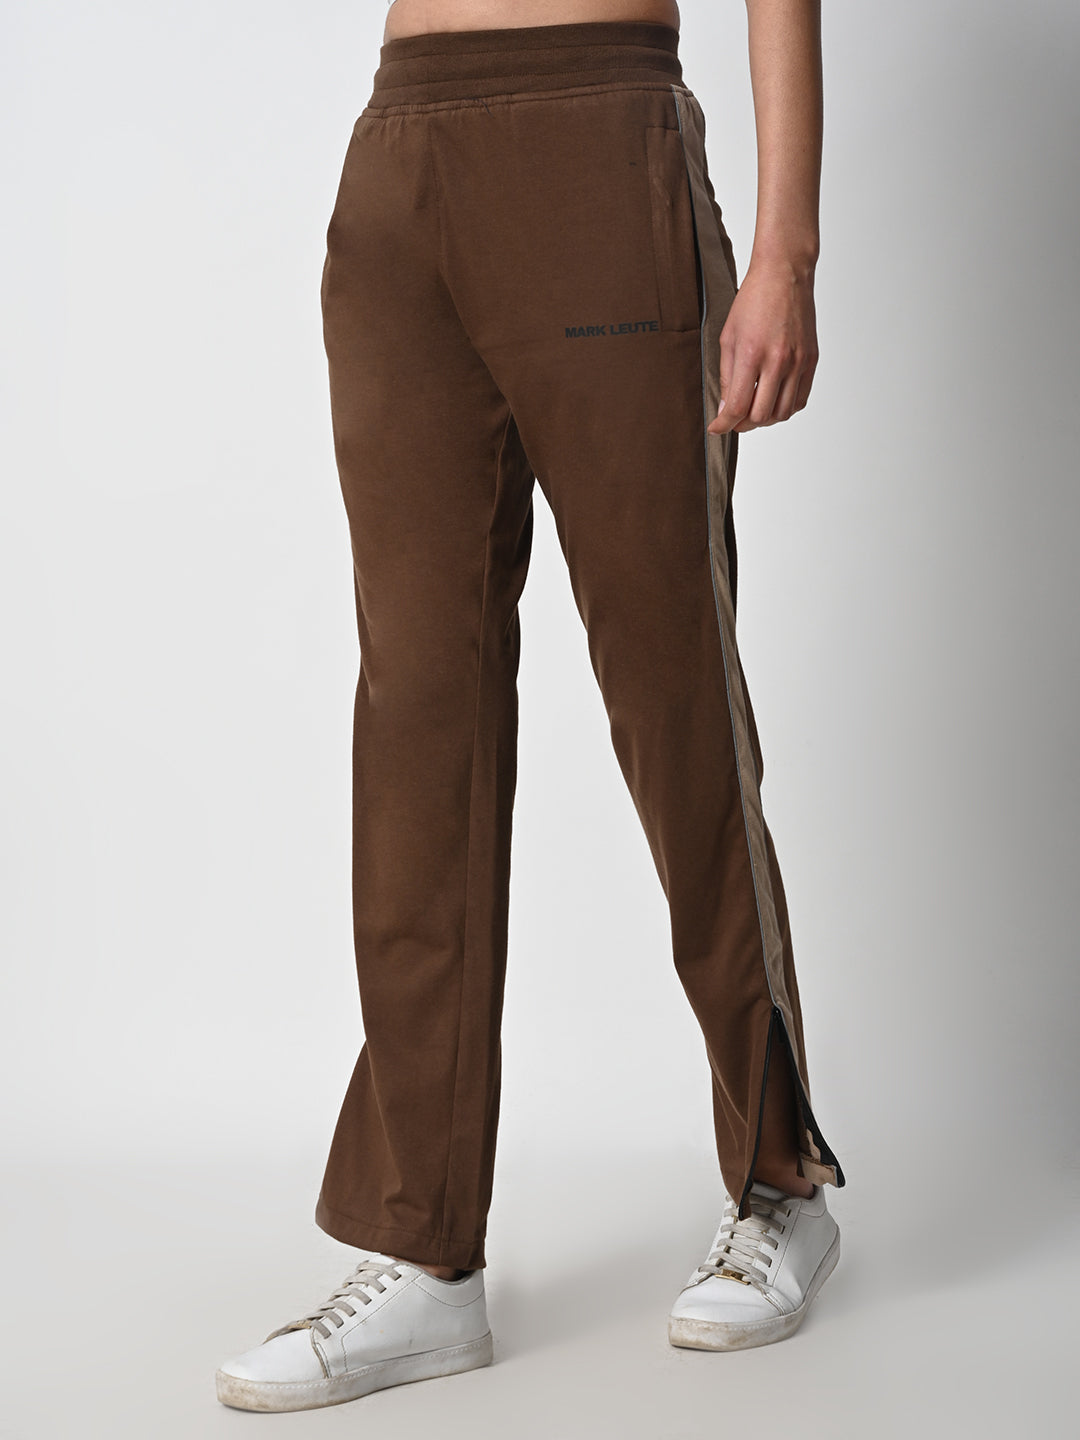 Reflective Side Stripe Cotton Track Pant for Women (Brown)